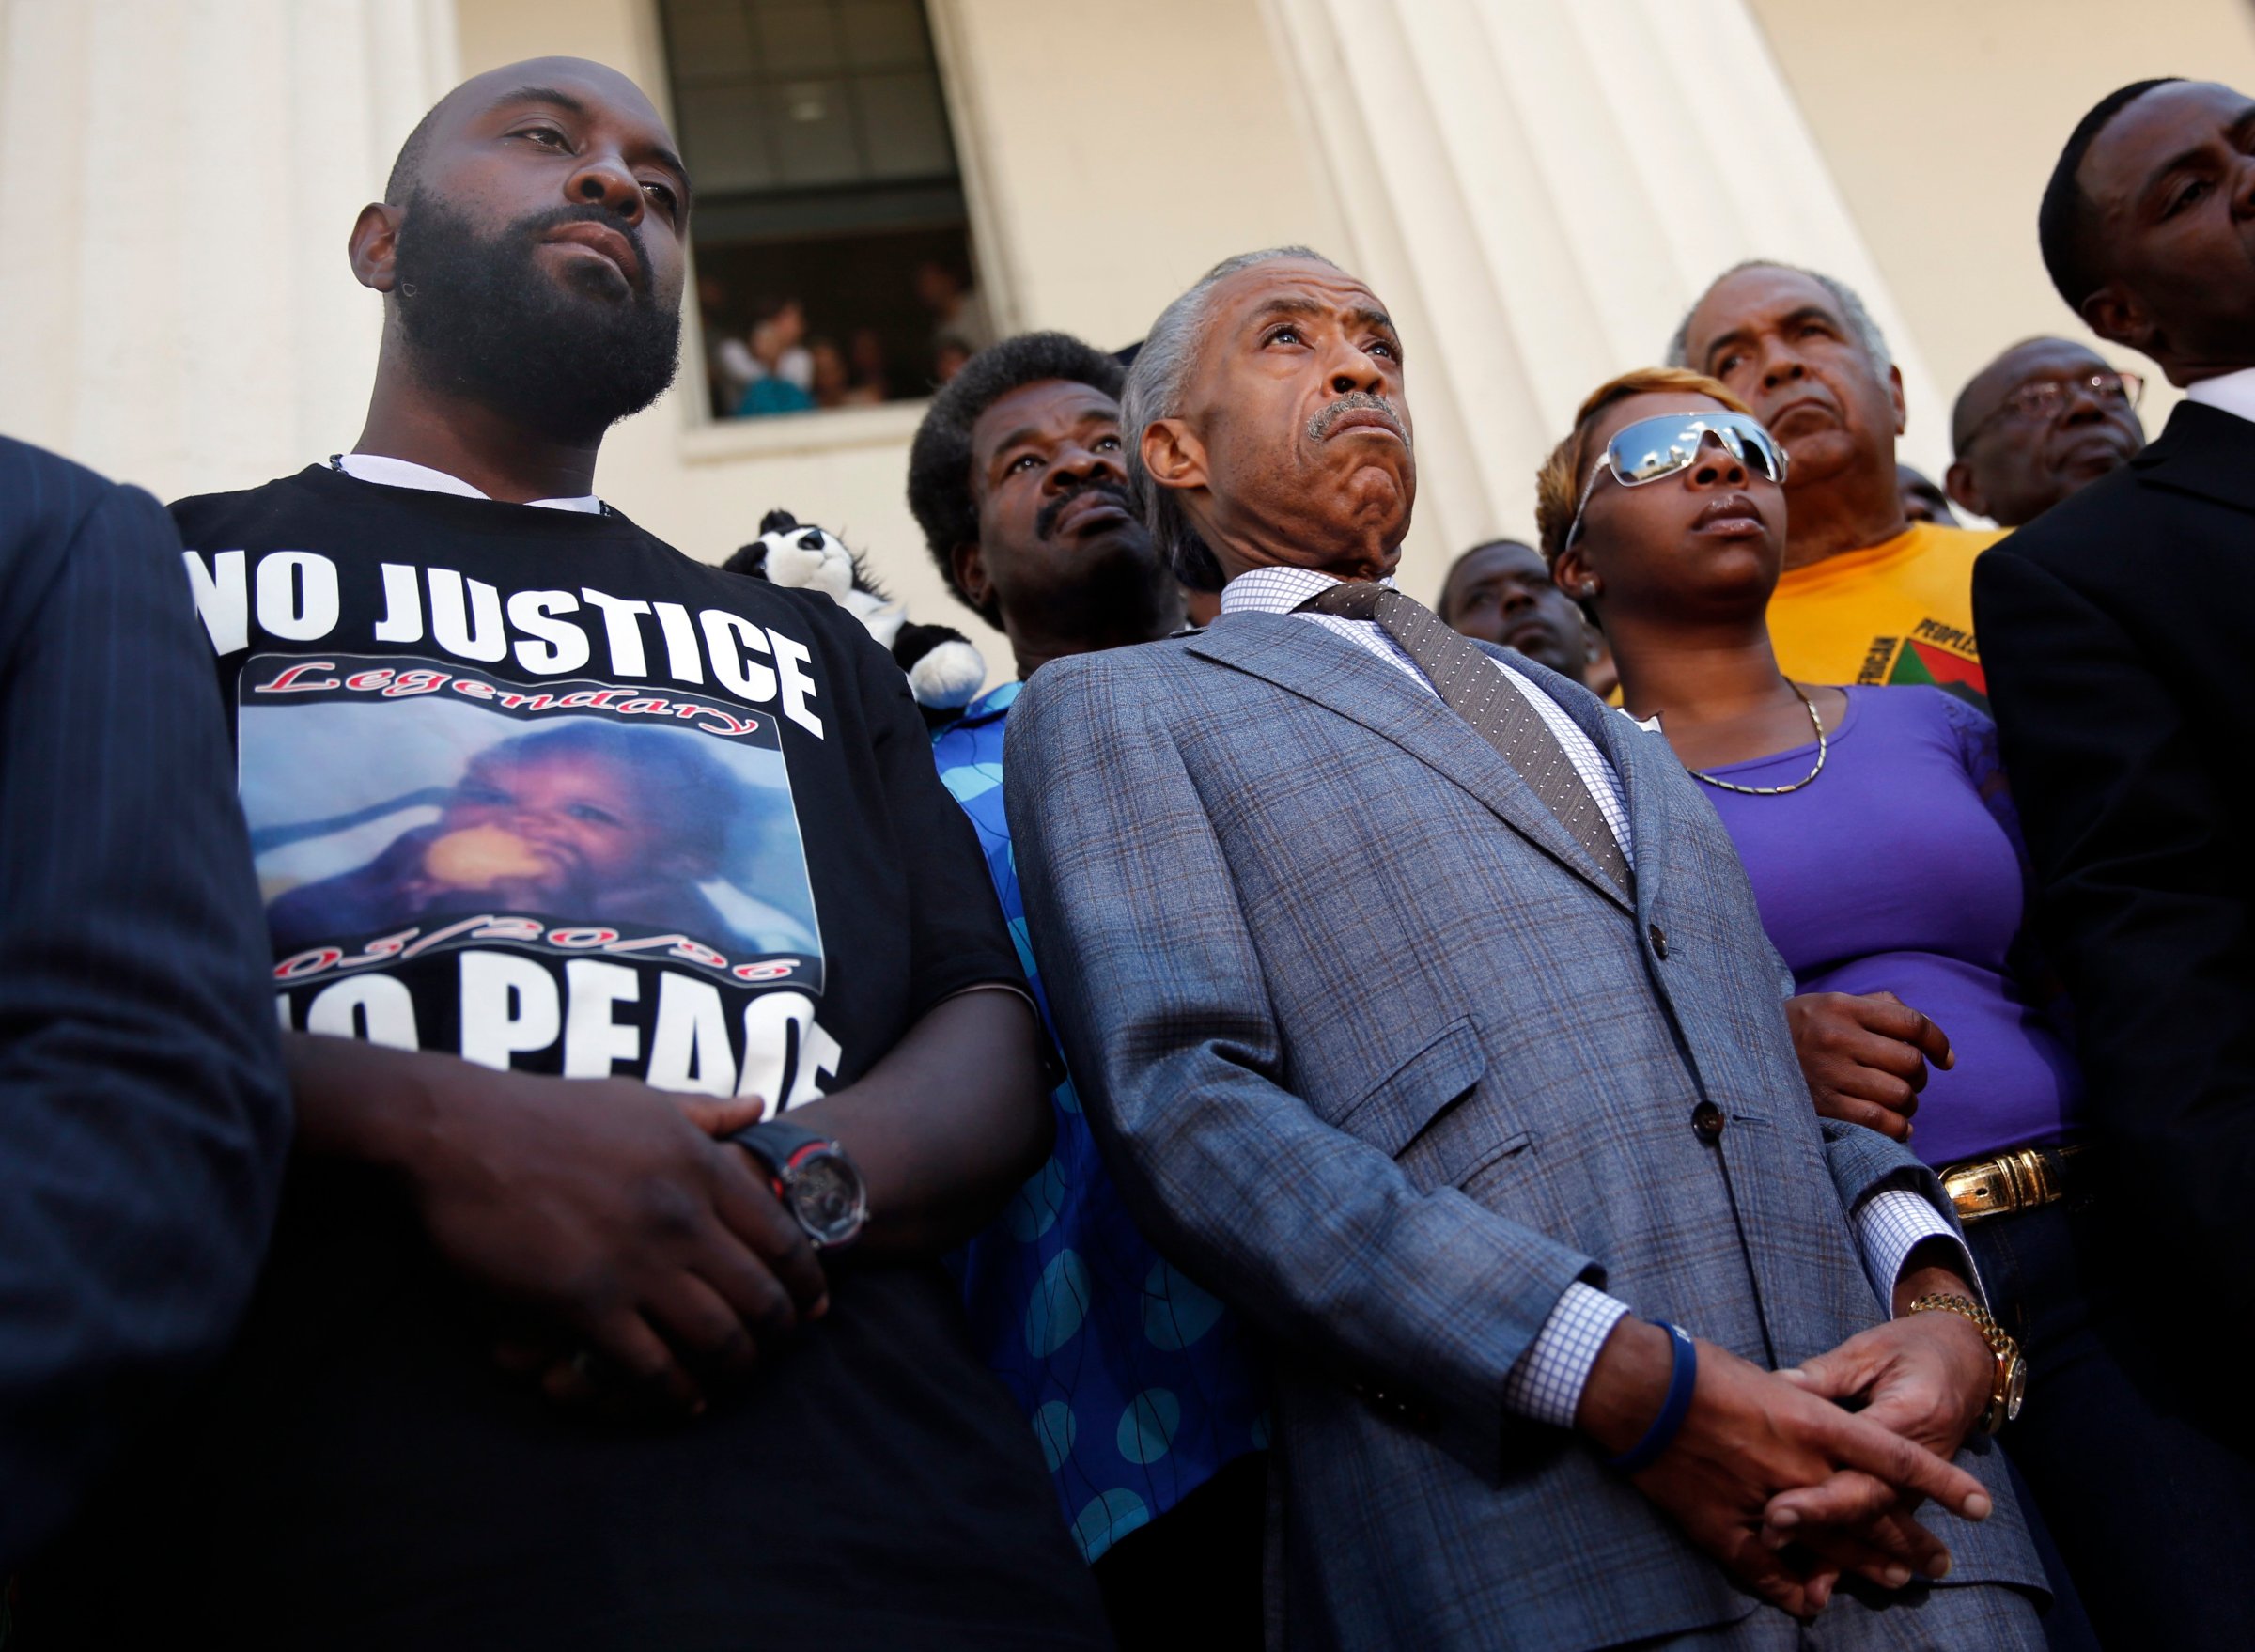 From left: Michael Brown, Sr., Reverend Al Sharpton, and Lesley McSpadden during a news conference outside the Old Courthouse in St. Louis on Aug. 12, 2014.